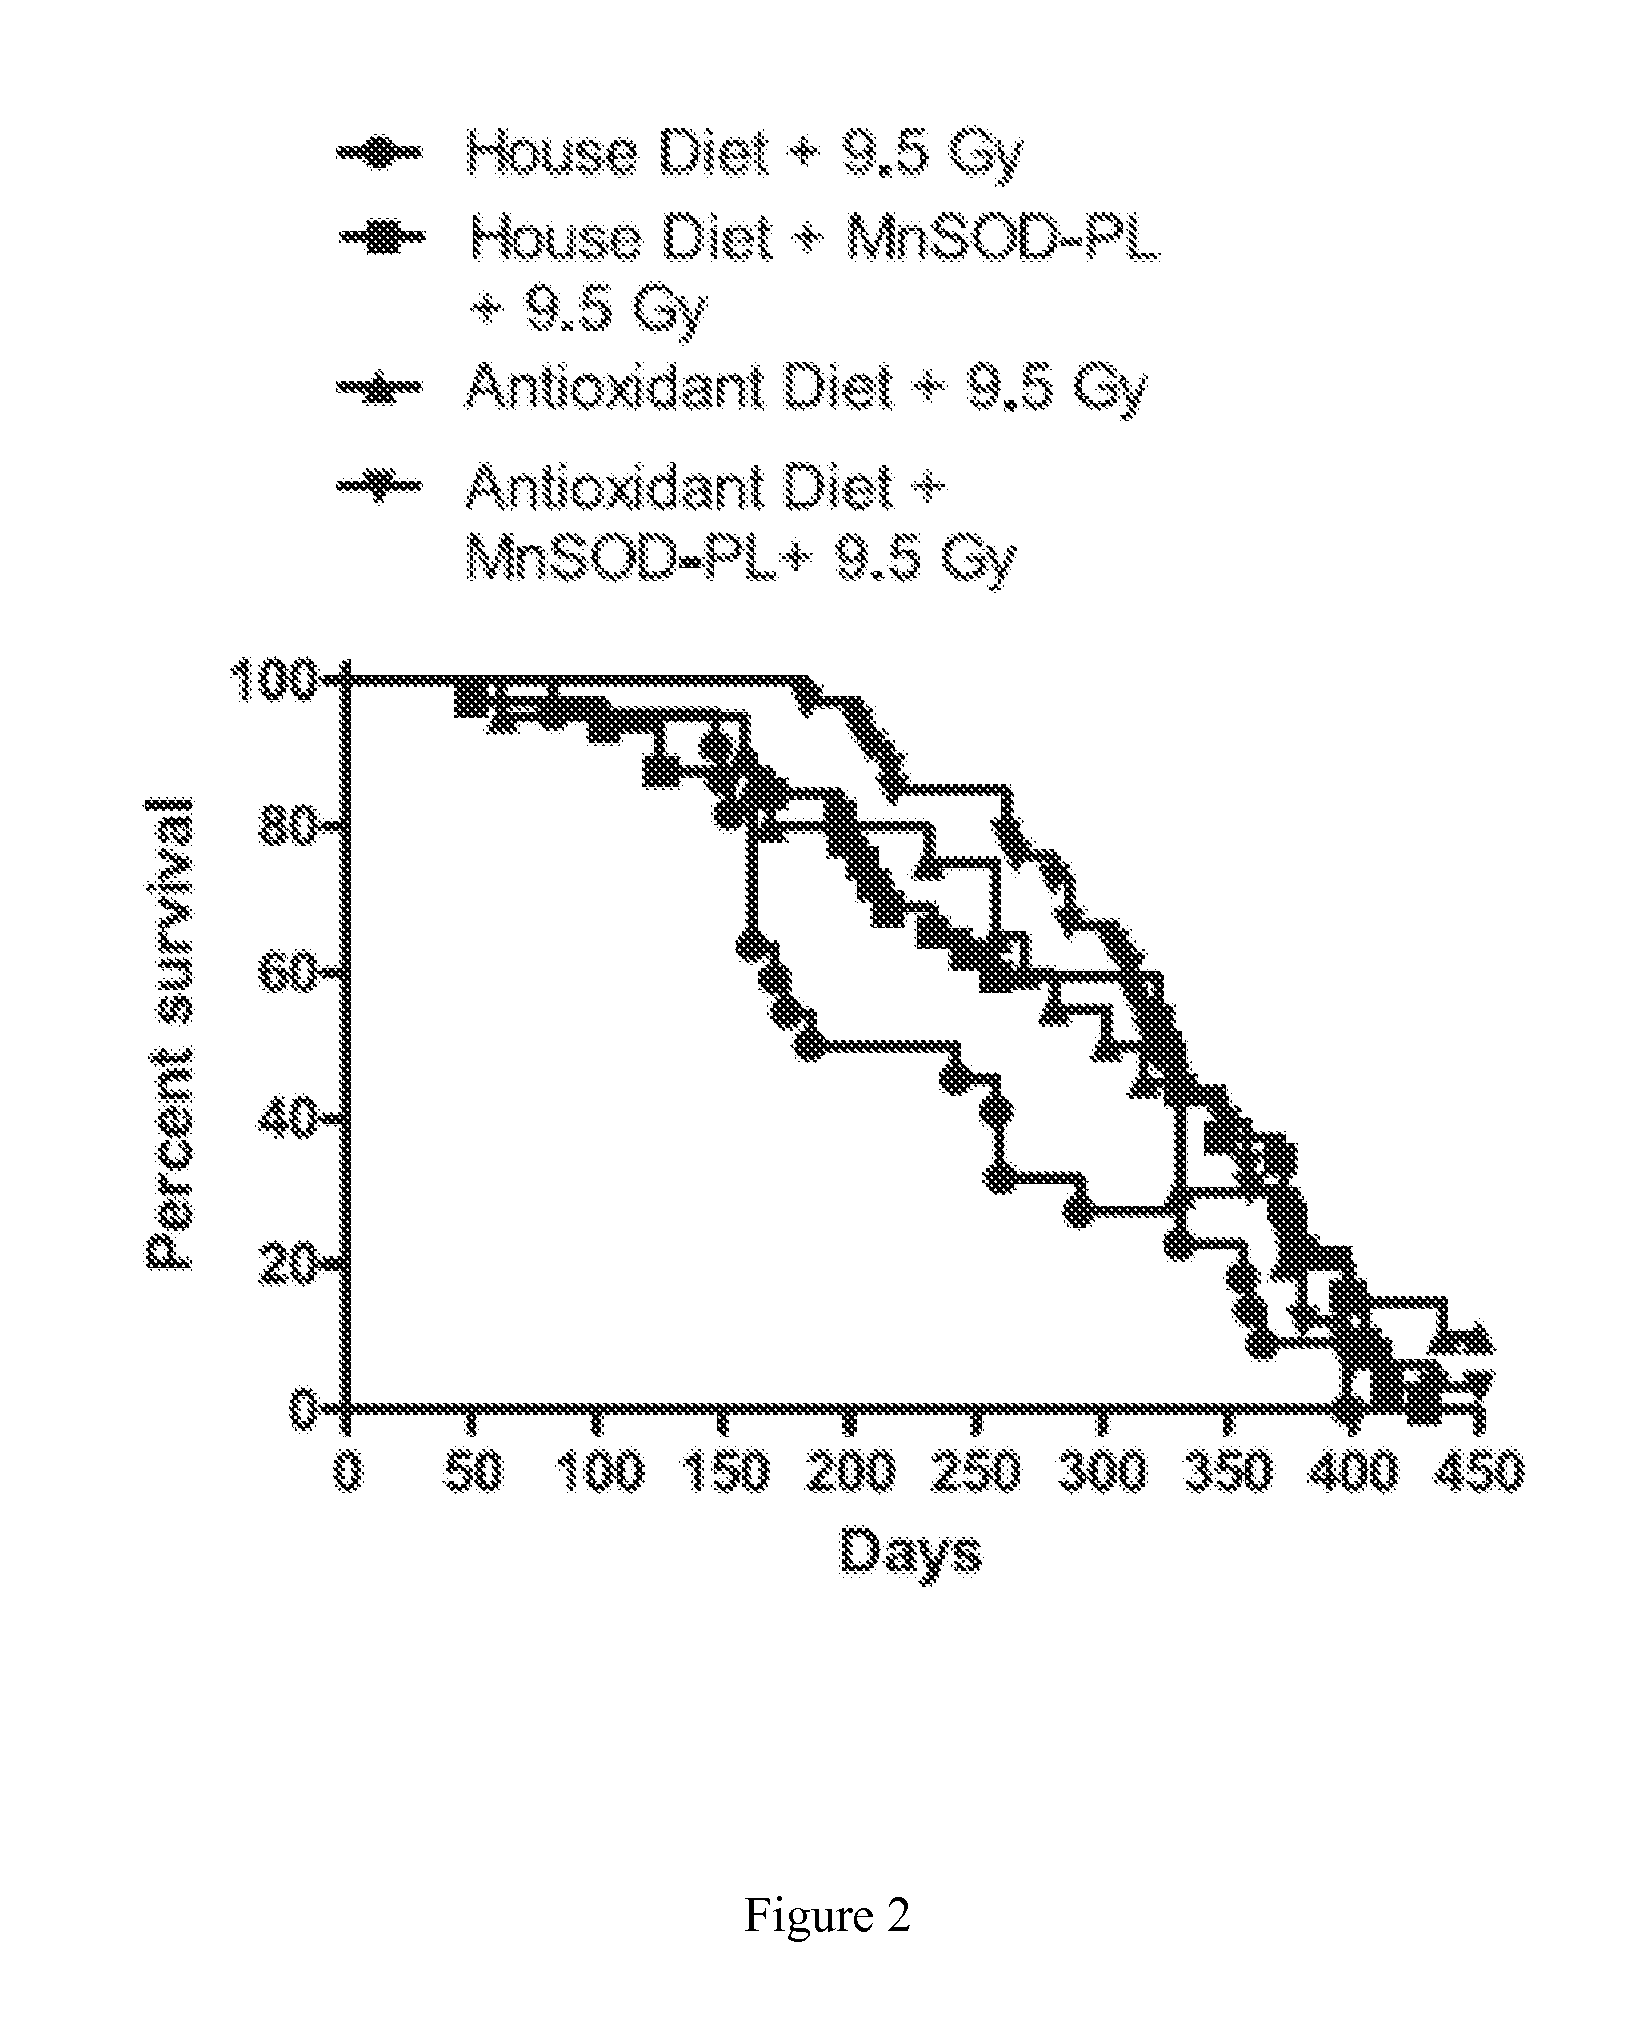 Method and composition for ameliorating the effects for a subject exposed to radiation or other sources of oxidative stress